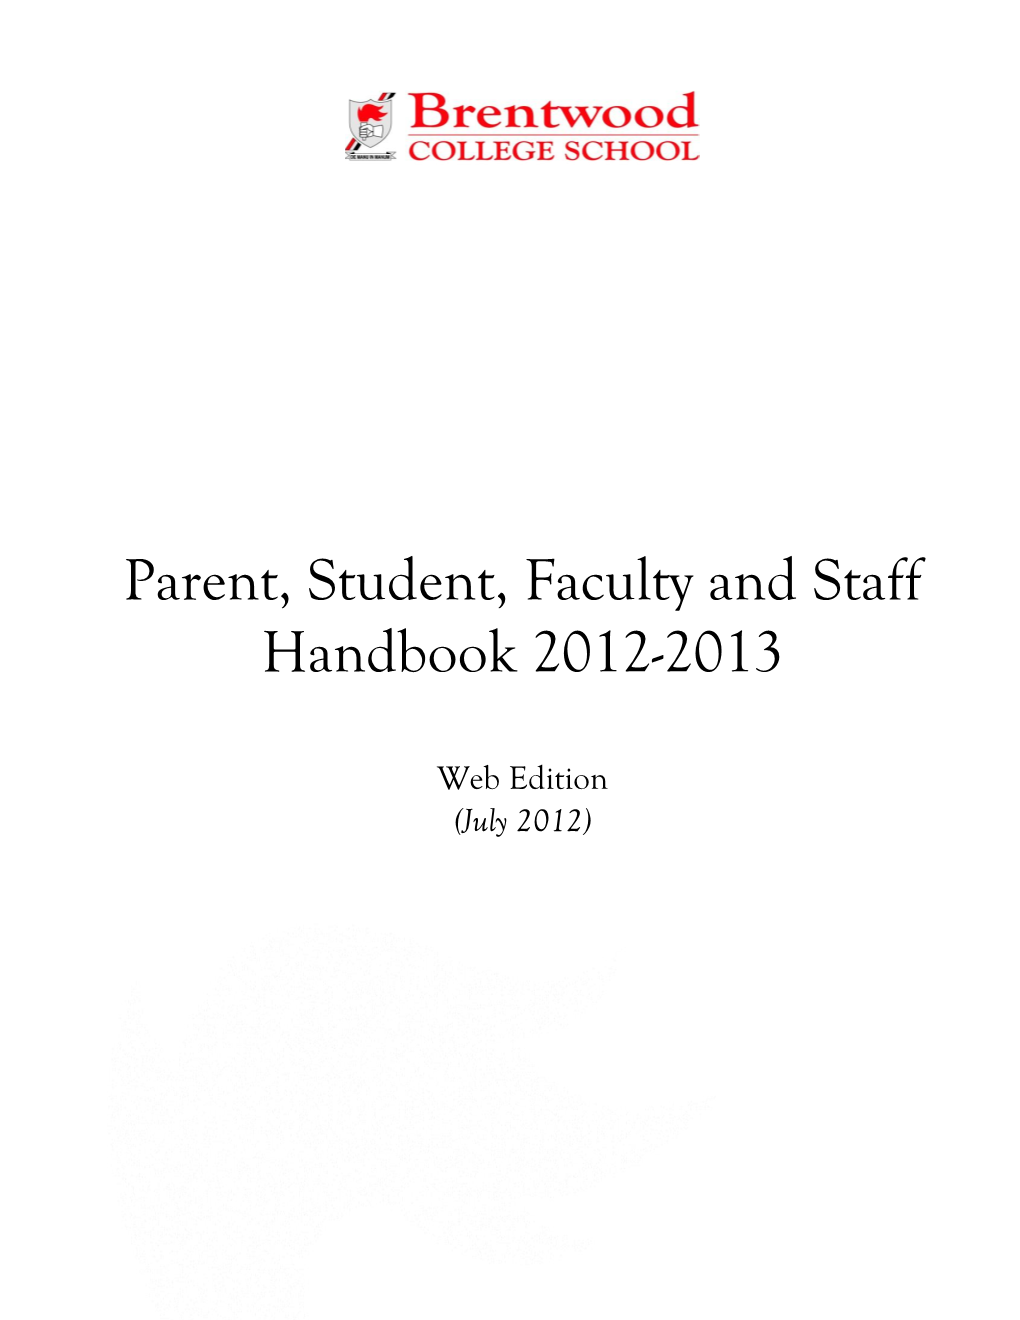 Parent, Student, Faculty and Staff Handbook 2012-2013